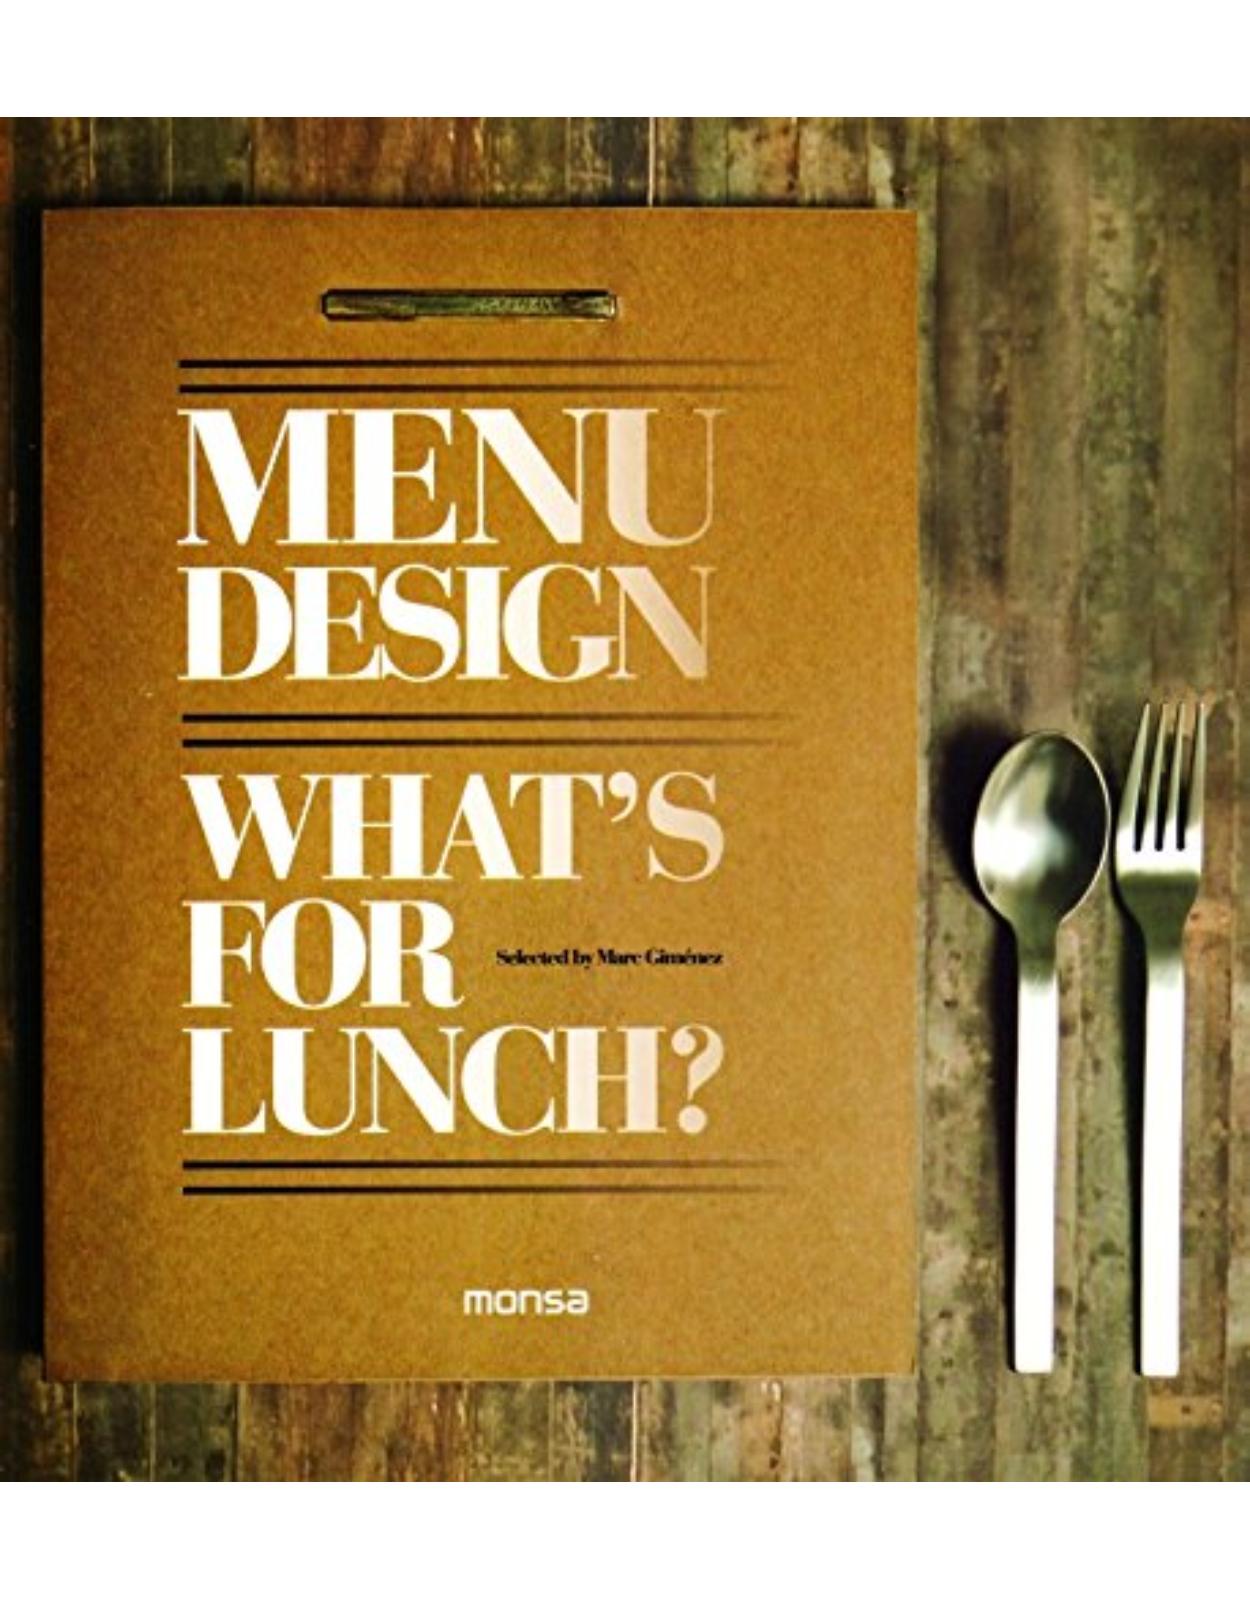 Menu Design: What's for Lunch?